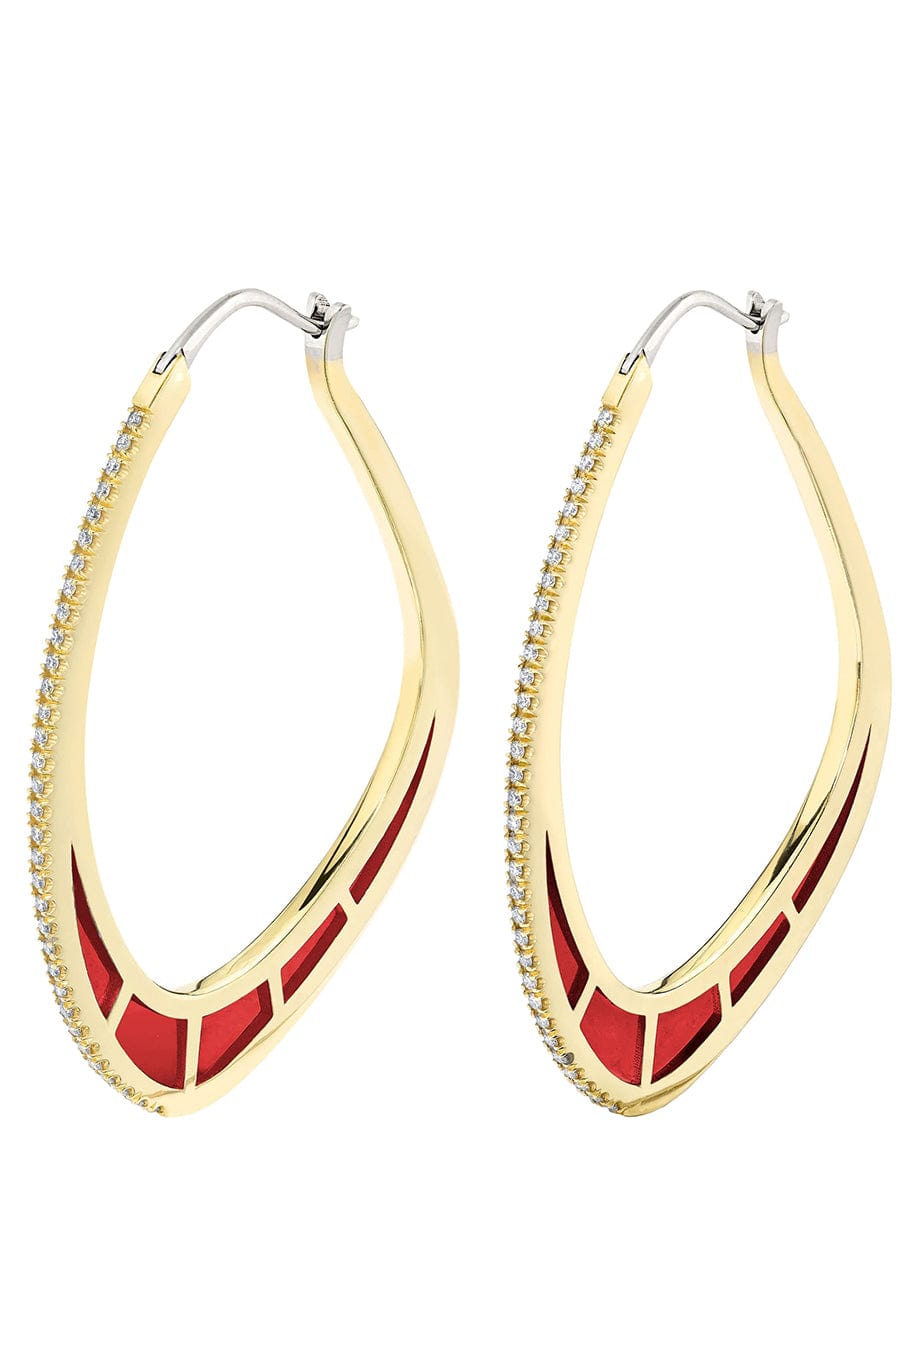 ANDY LIF-Red Enamel Diamond Cica Earrings-YELLOW GOLD